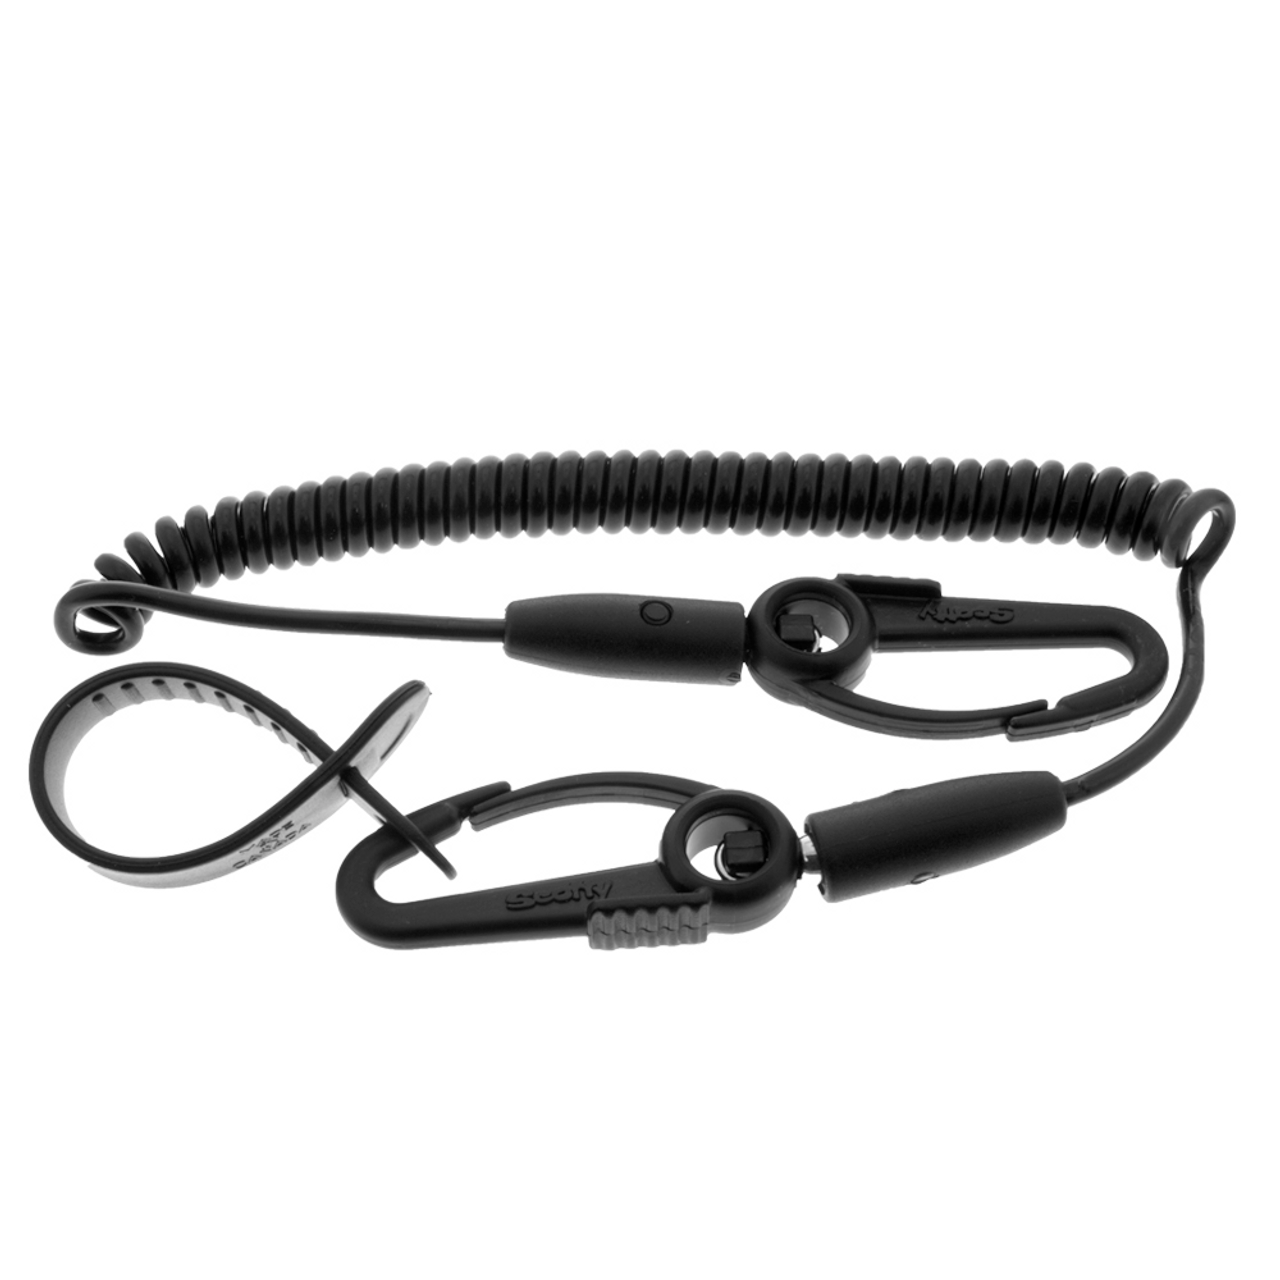 Scotty Safety Paddle Leash with Flexcoil, Black